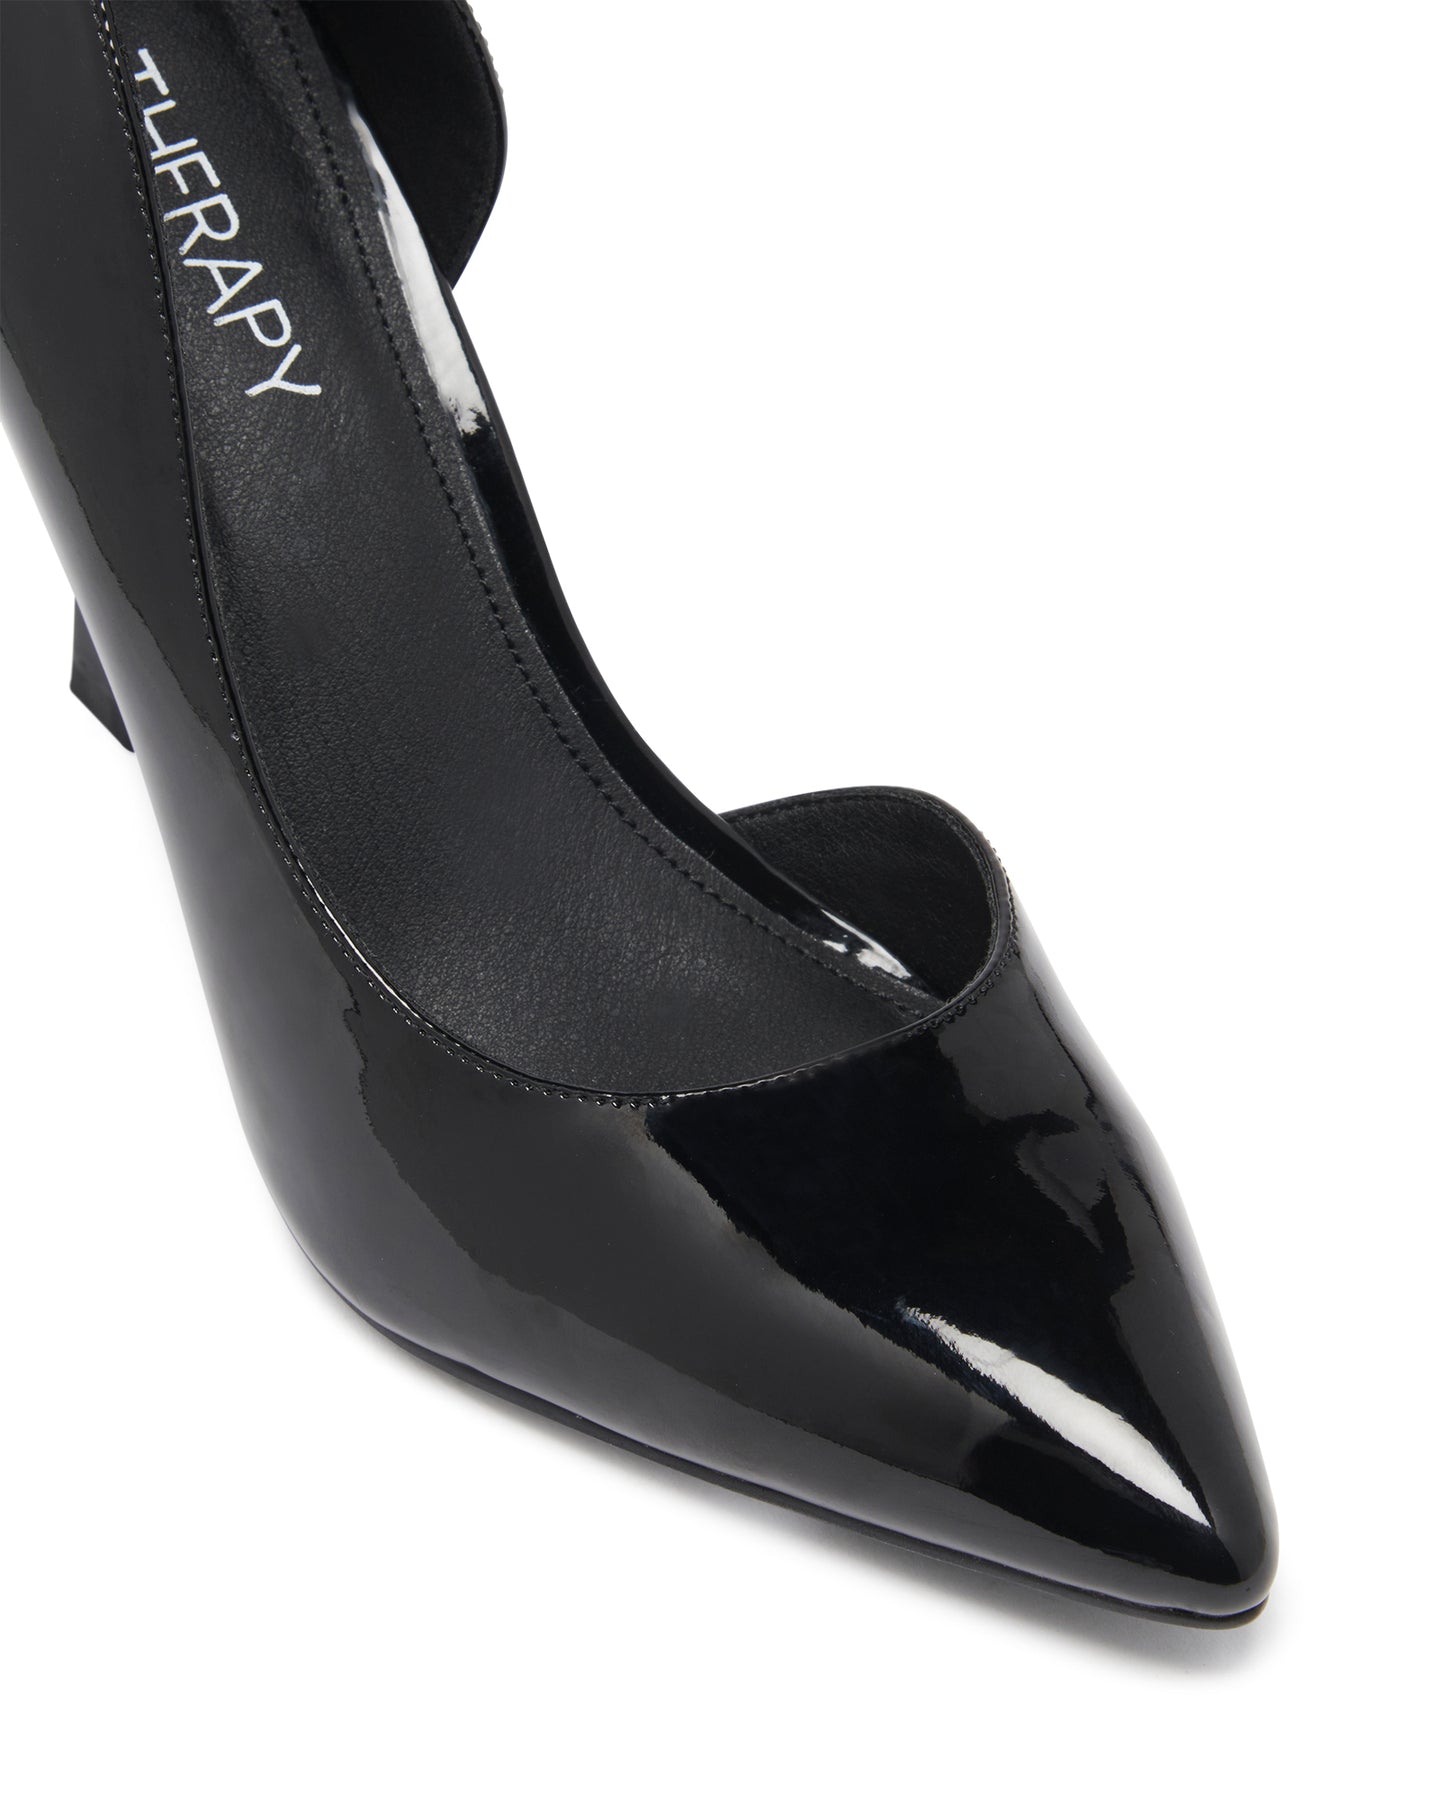 Buy Black Patent Regular/Wide Fit Forever Comfort® Round Toe Block Heel  Court Shoes from the Next UK online shop